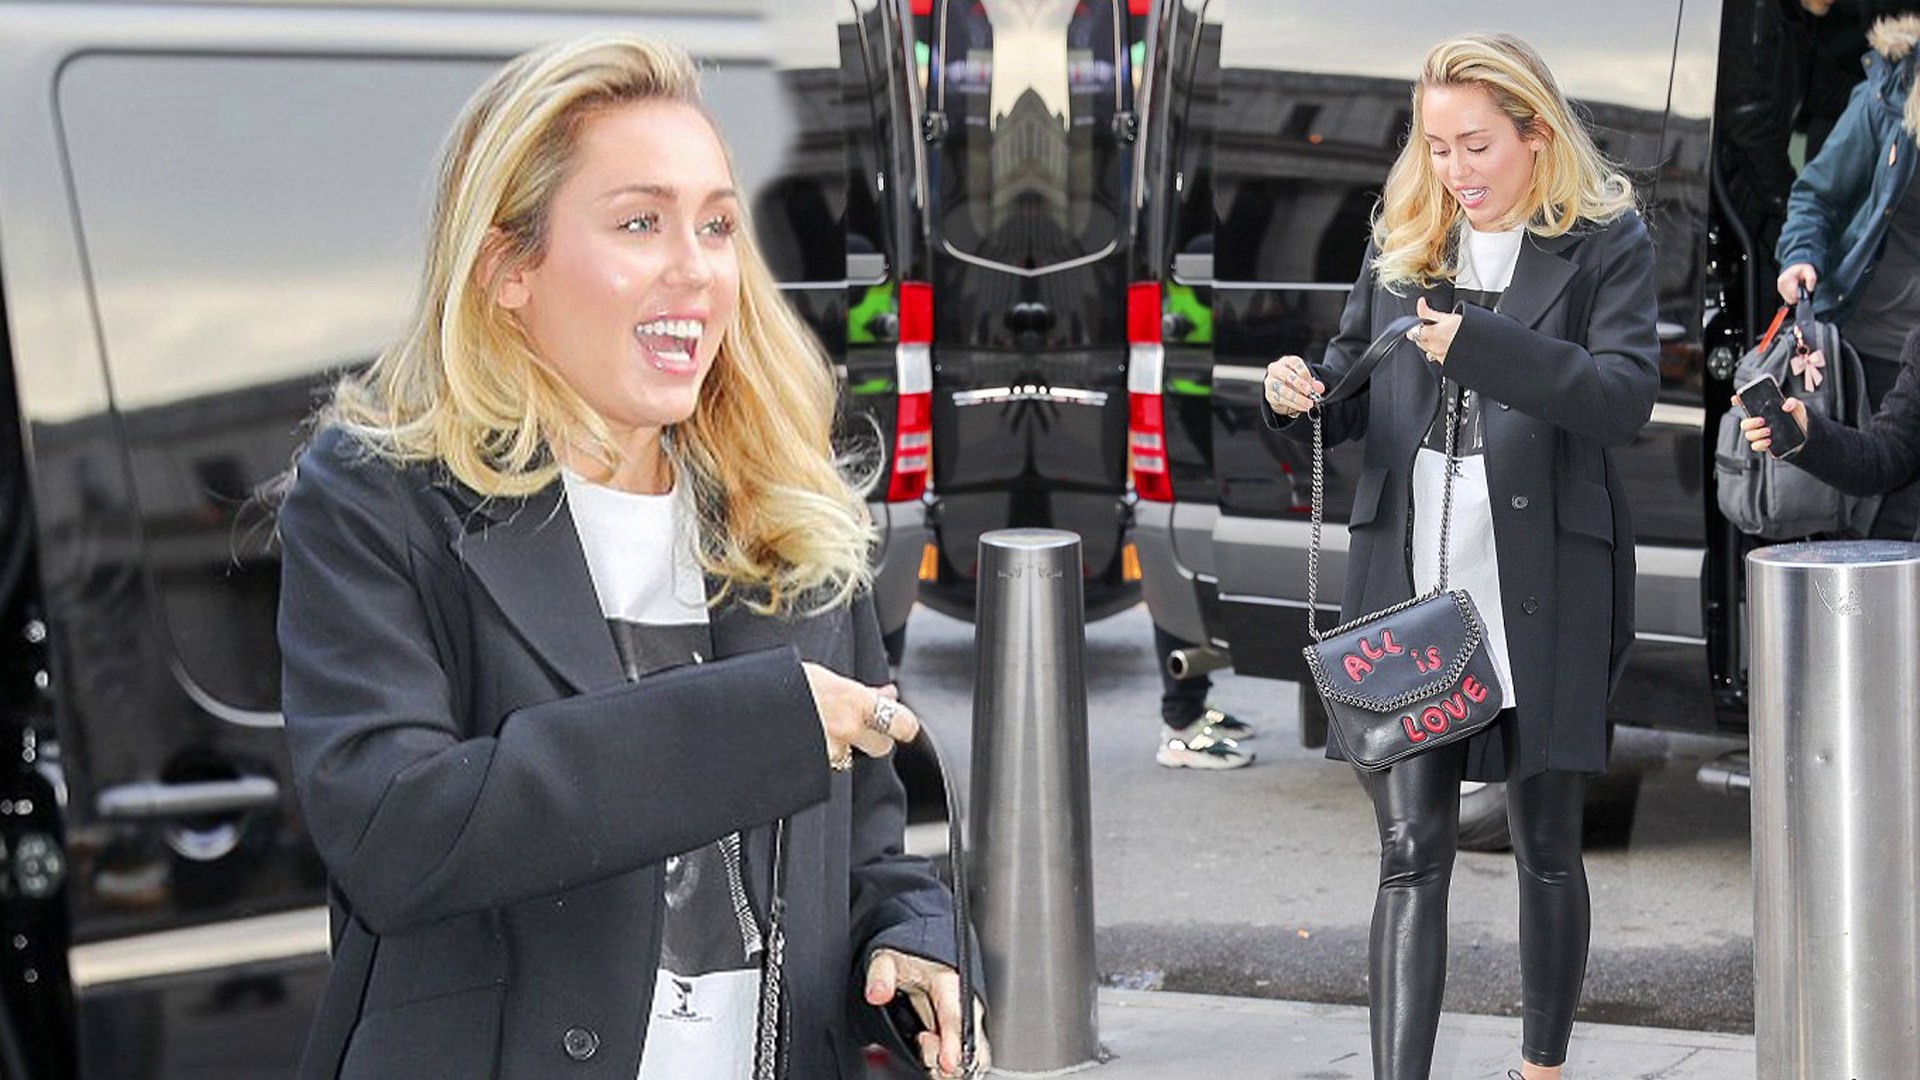 Making a statement! Miley Cyrus looks rocker chic in leggings as she heads to Elton John tribute... 